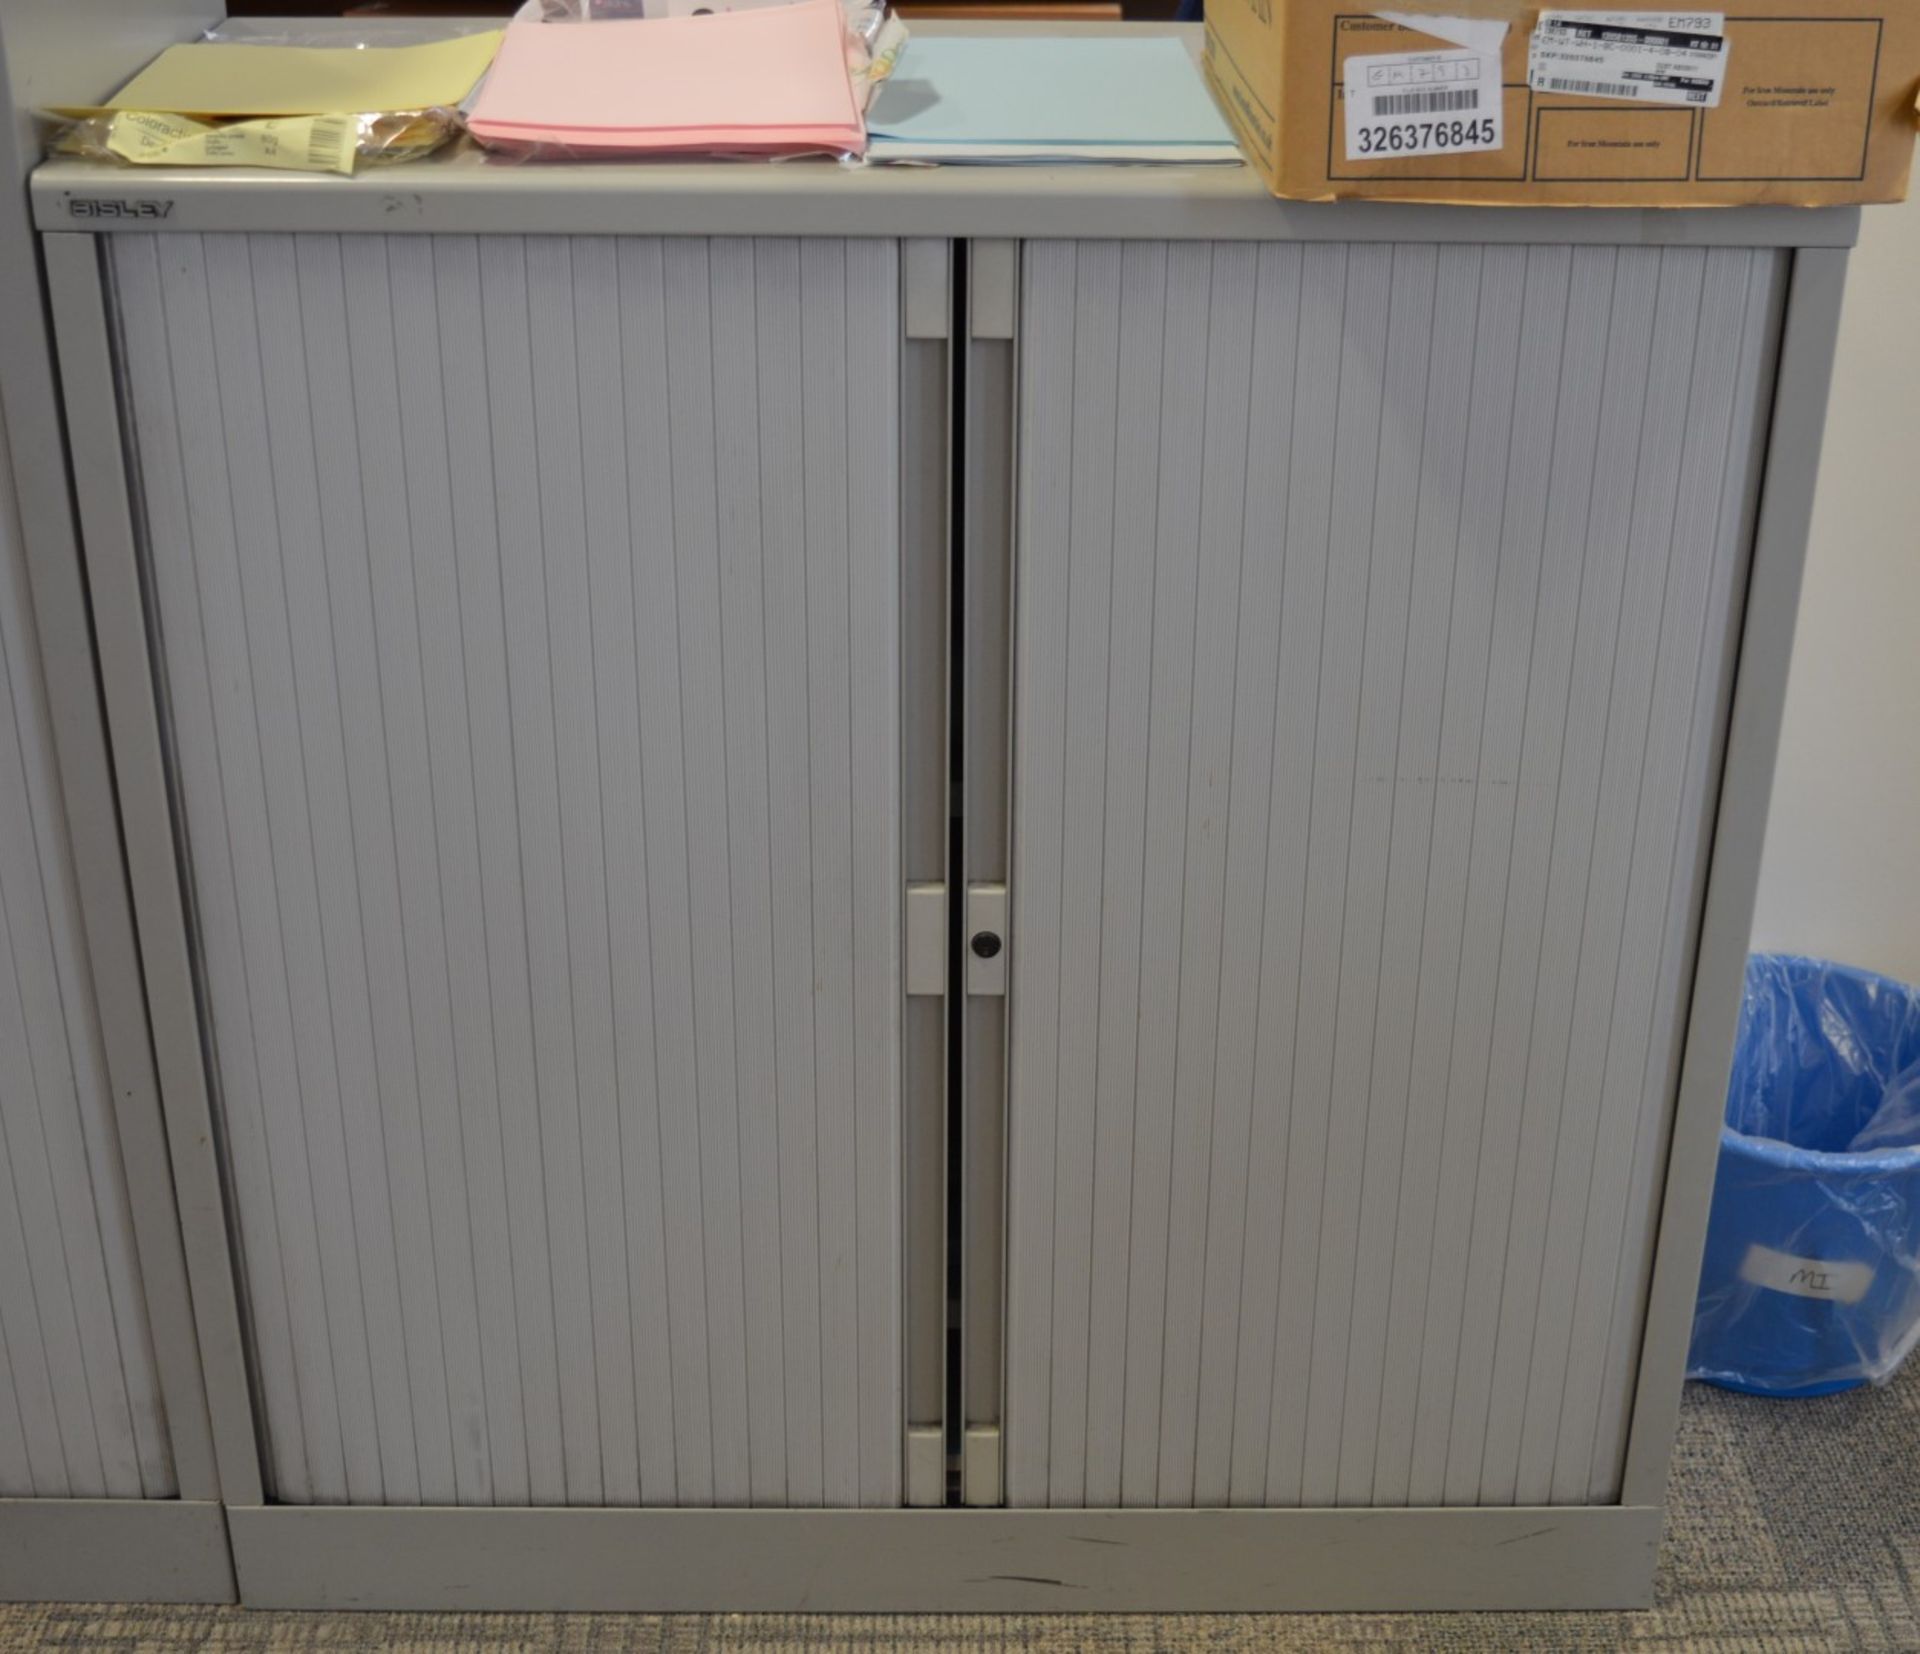 1 x Bisley Office Storage Cabinet With Tambour Sliding Doors - Does NOT Include Key - H102 x W100